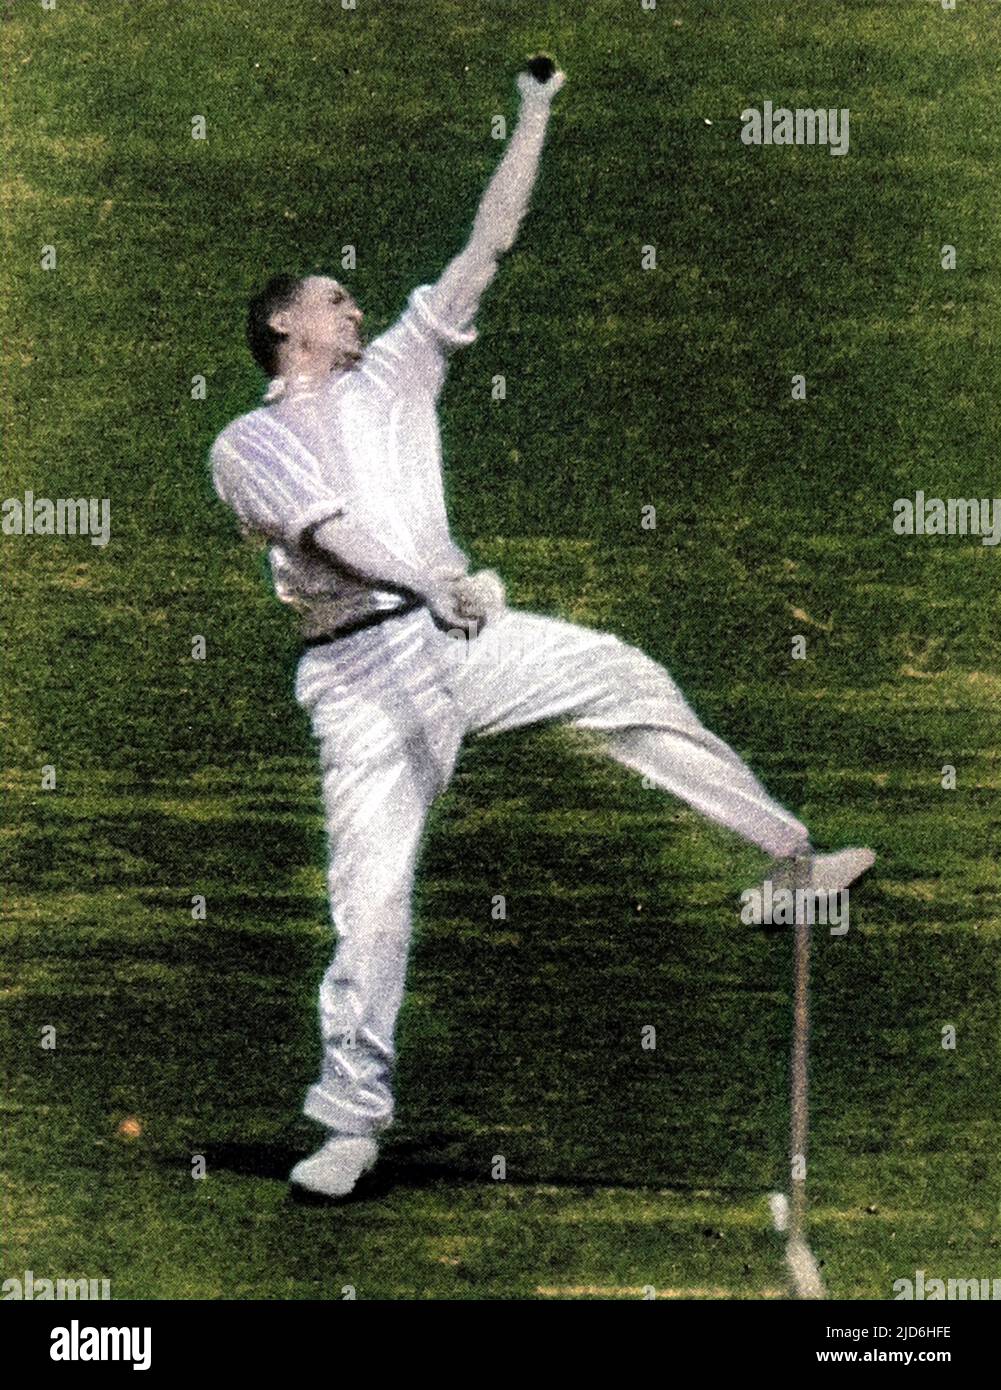 Photograph of the English bowler, Harold Larwood, in action during the MCC tour of Australia, 1933.   During that tour, D.R. Jardine, the MCC Captain, used the pace of Larwood to employ 'leg theory' (also known as 'bodyline' bowling).   Although successful on the cricket field, the tactic was deemed unsportsmanlike by many Australians and soured Anglo-Australian relations. Colourised version of: 10218973       Date: 1933 Stock Photo